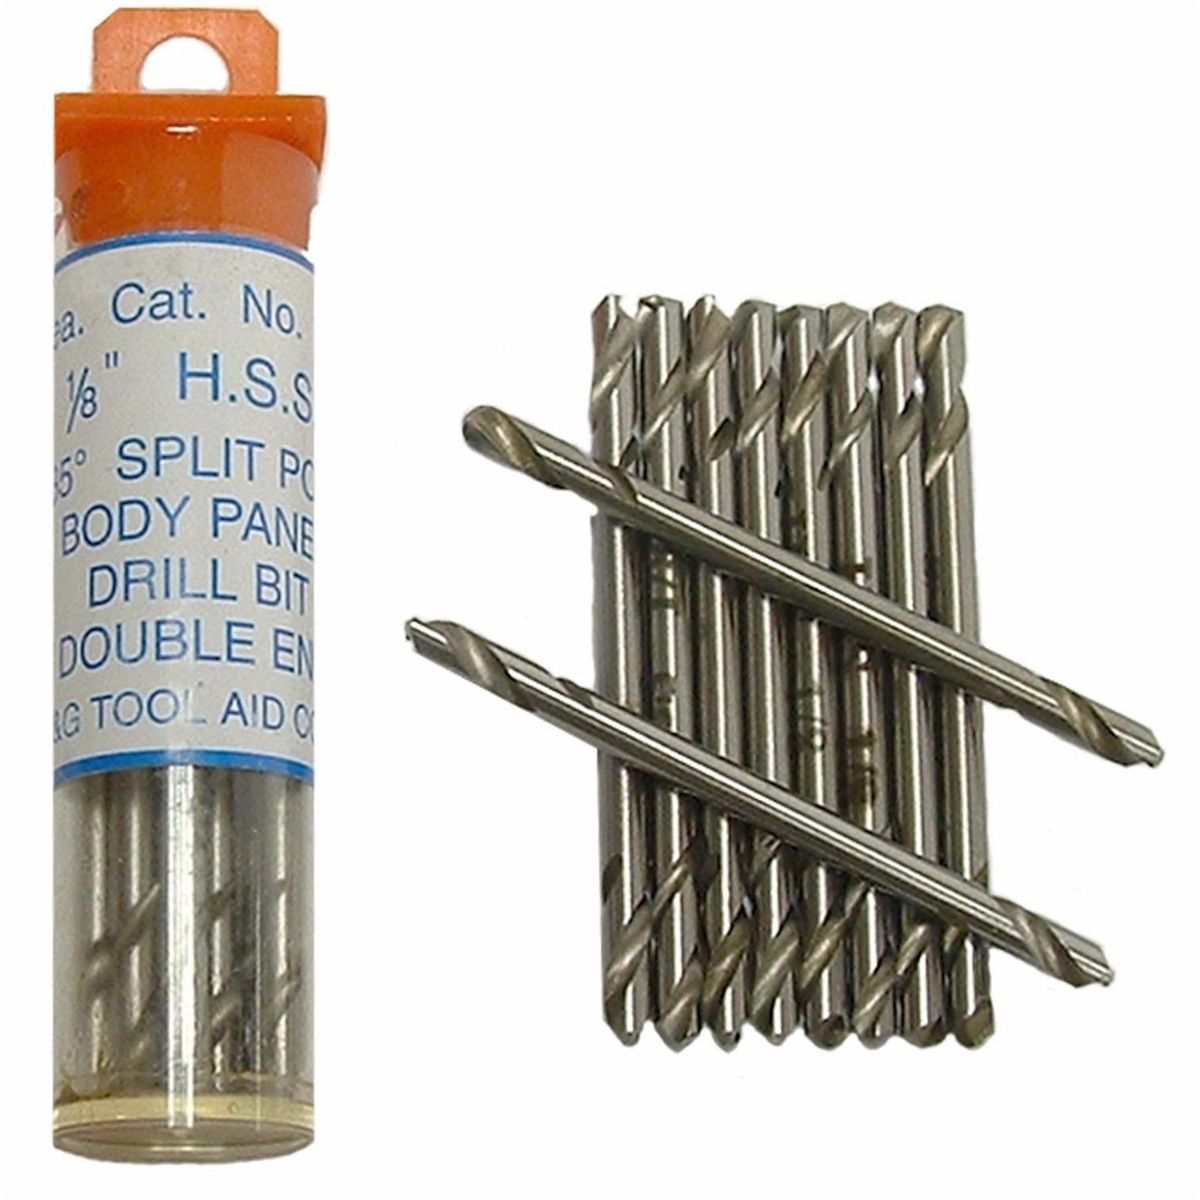 Double Ended Stubby Body Panel Drill Bits - 1/8 Inch